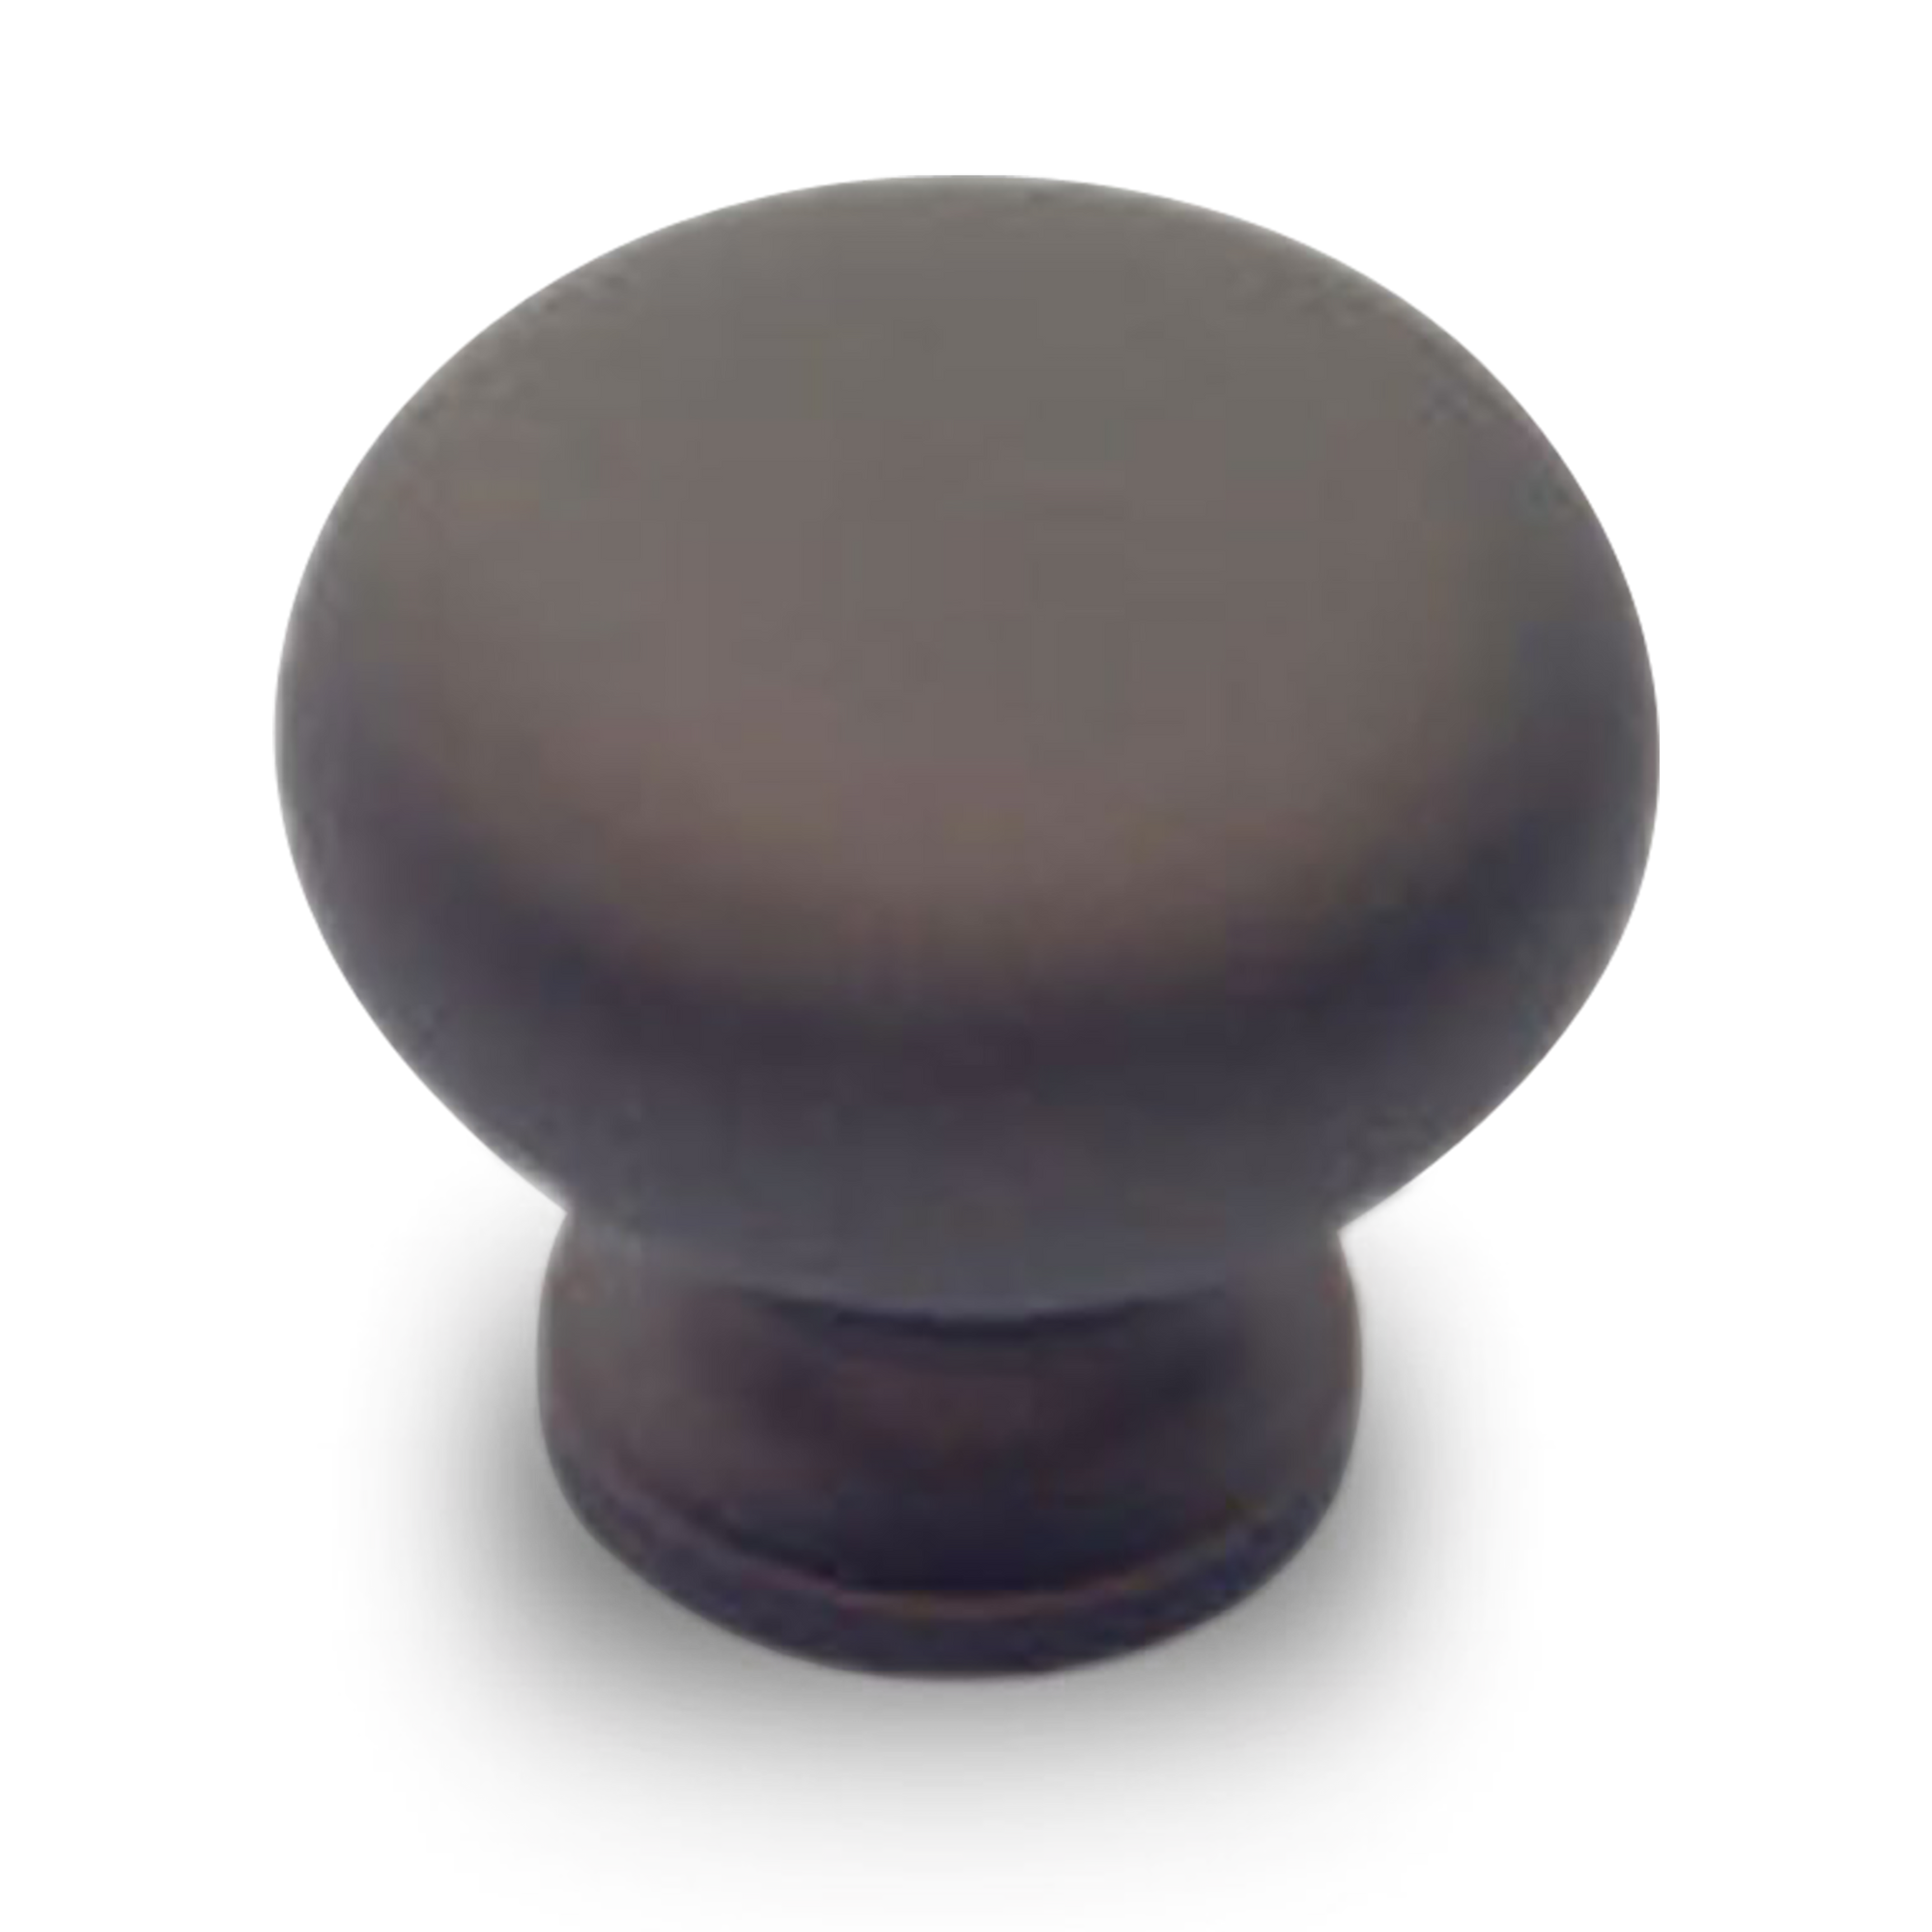 A clean and contemporary round knob with rounded edges.